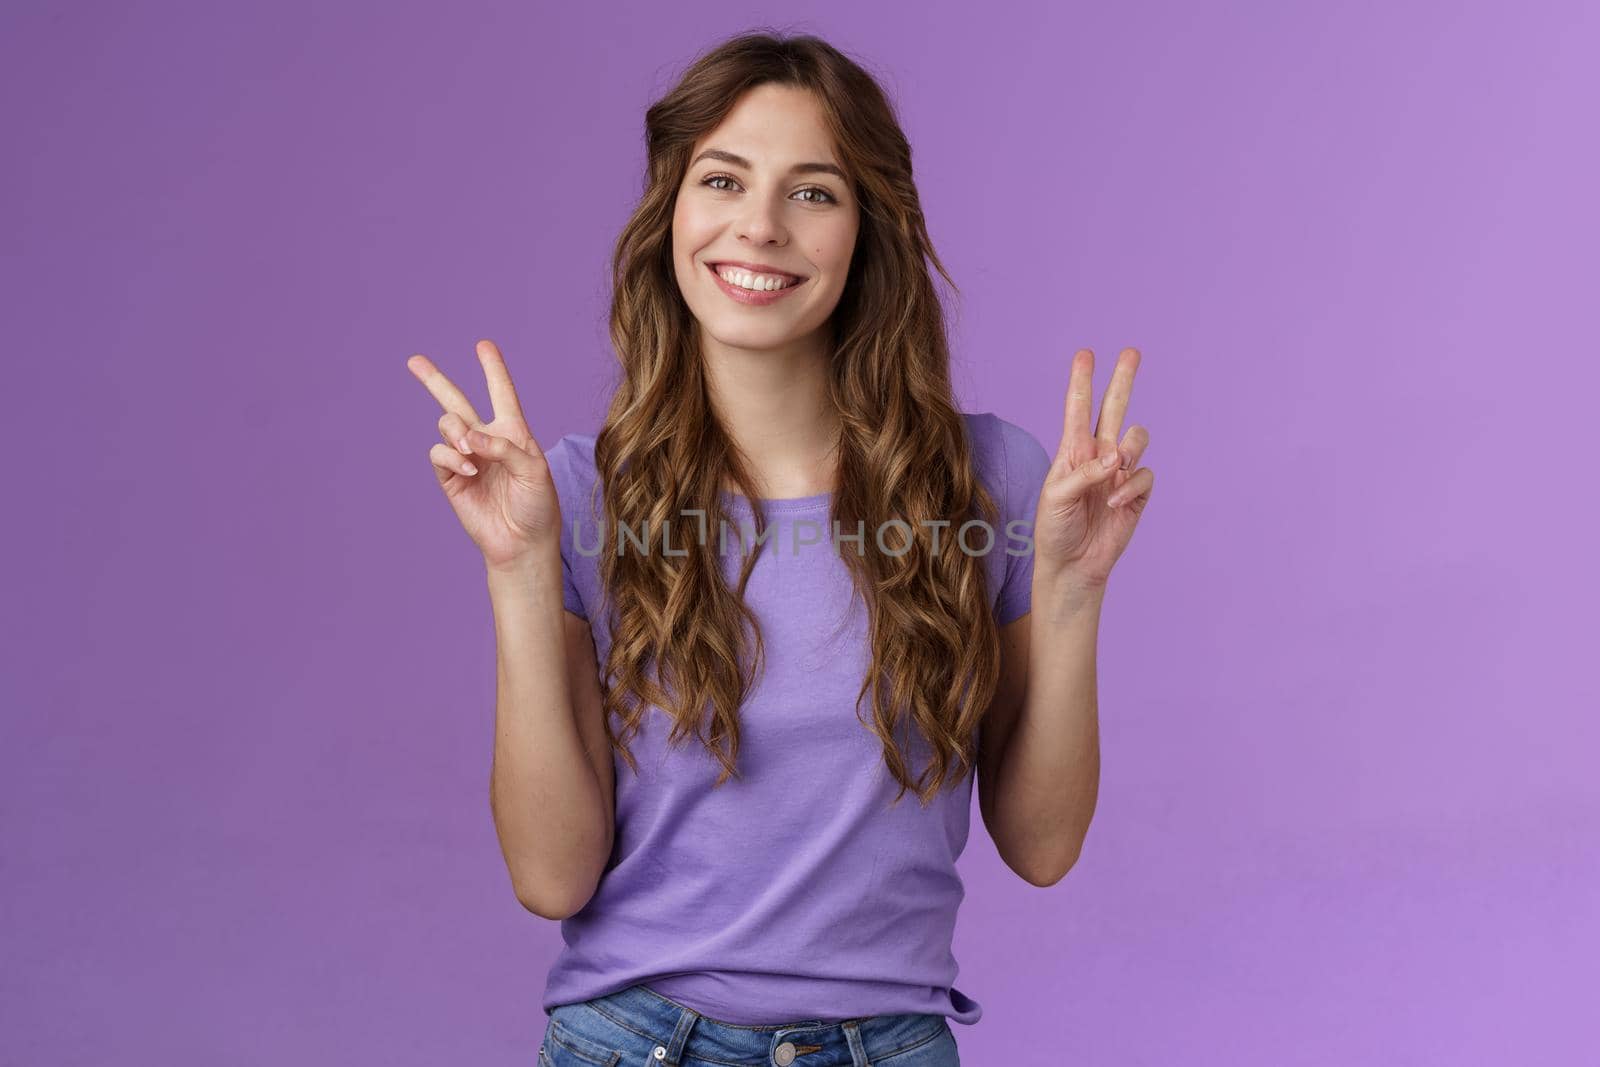 Peace friends. Relaxed friendly cute self-assured girl long curly hairstyle show victory sign smiling broadly cheering express positive optimistic attitude have fun enjoy summer purple background by Benzoix